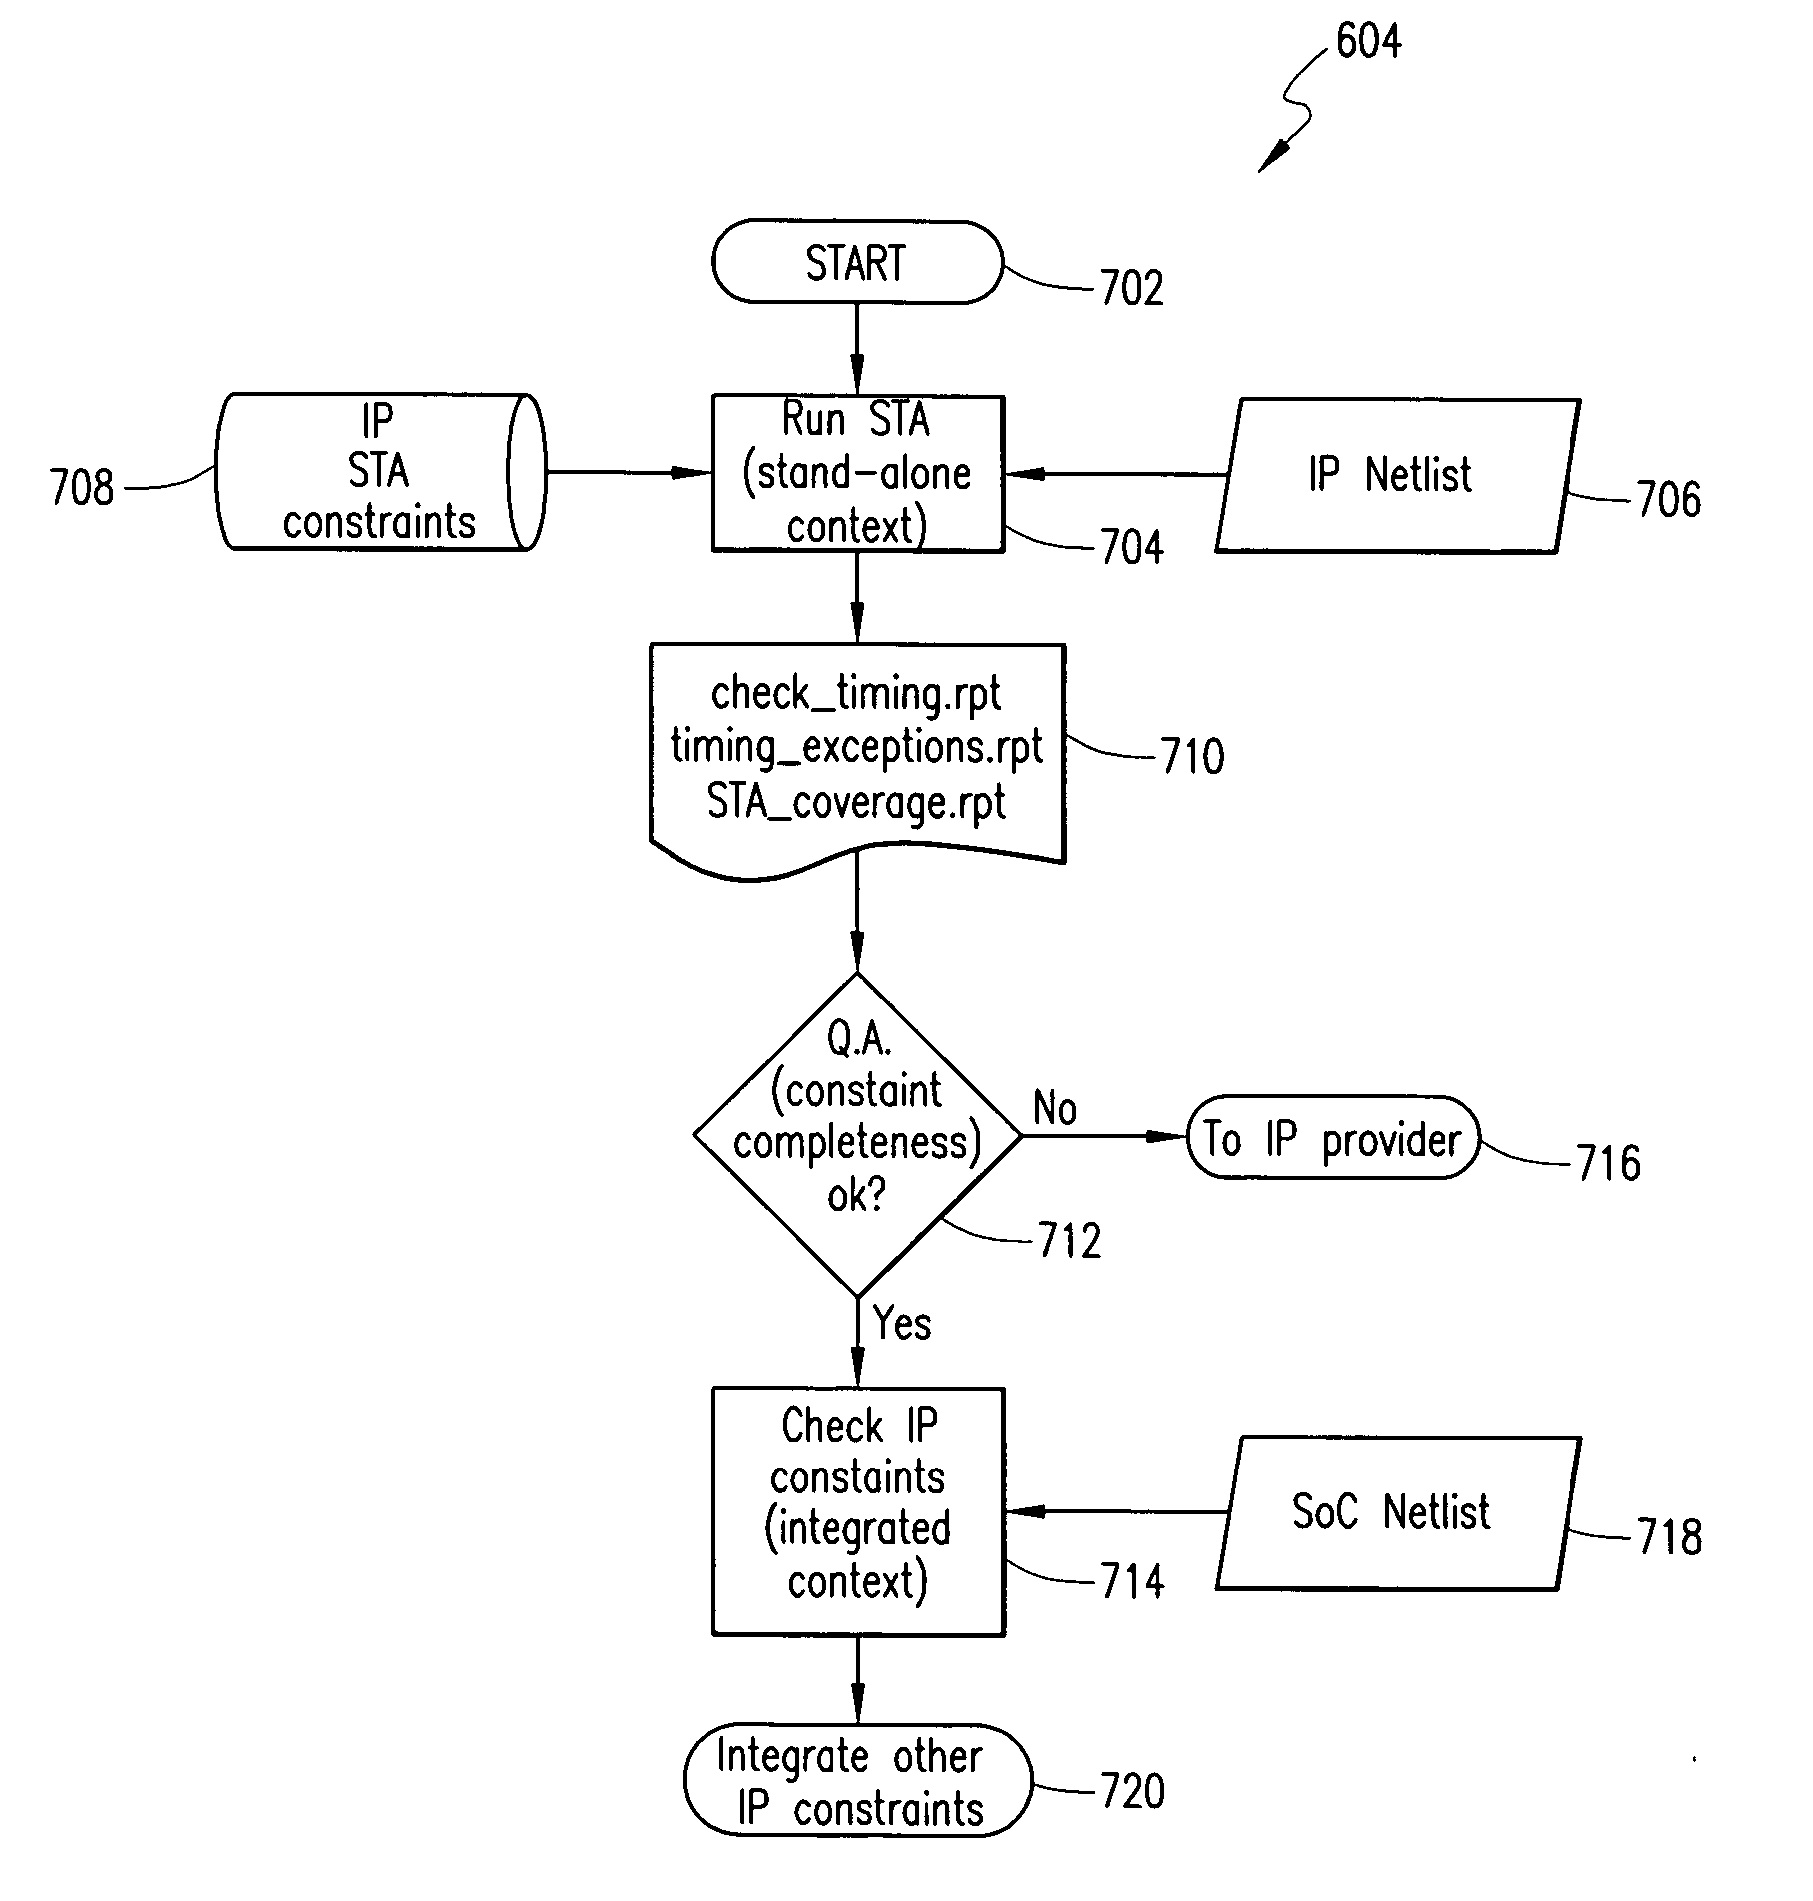 Method for specification and integration of reusable IP constraints